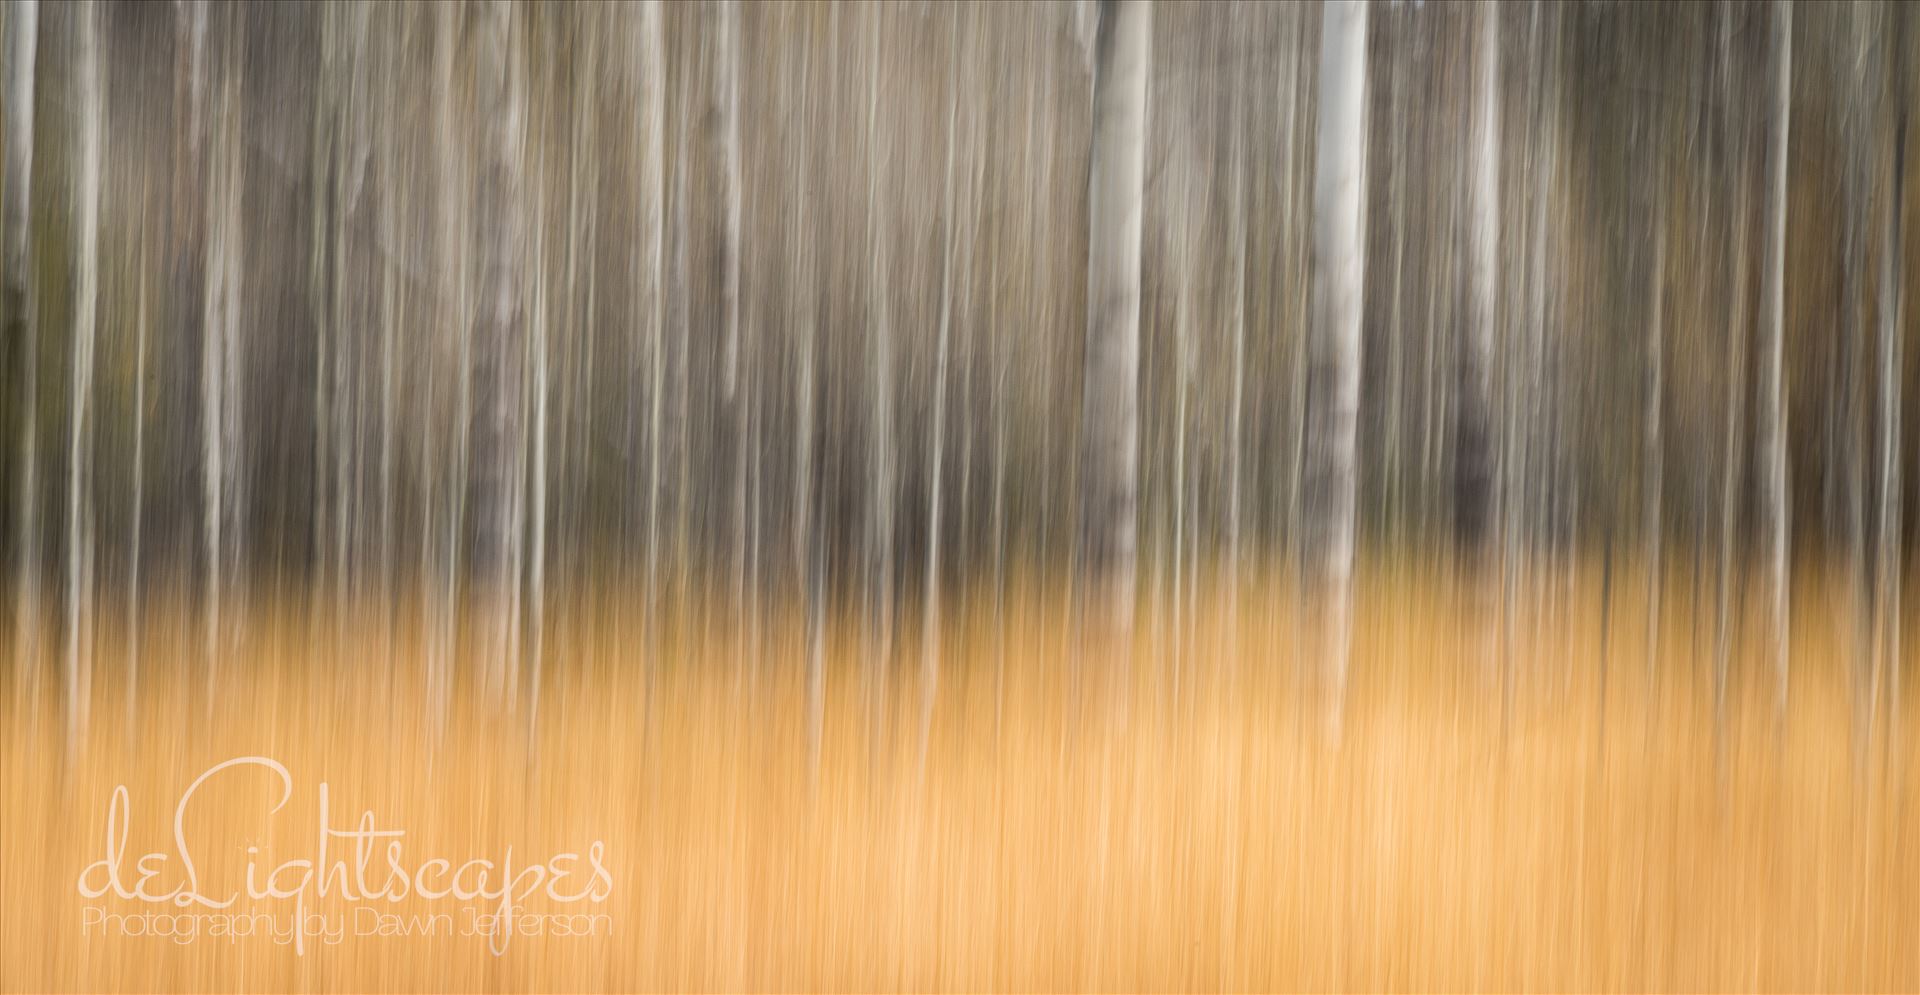 Bare Aspen Intentional Camera Movement (ICM) - purposeful movement of the camera while the shutter is open causing intentional blurring of your subject. This is one of my favorite techniques for making dreamy abstracts. by Dawn Jefferson